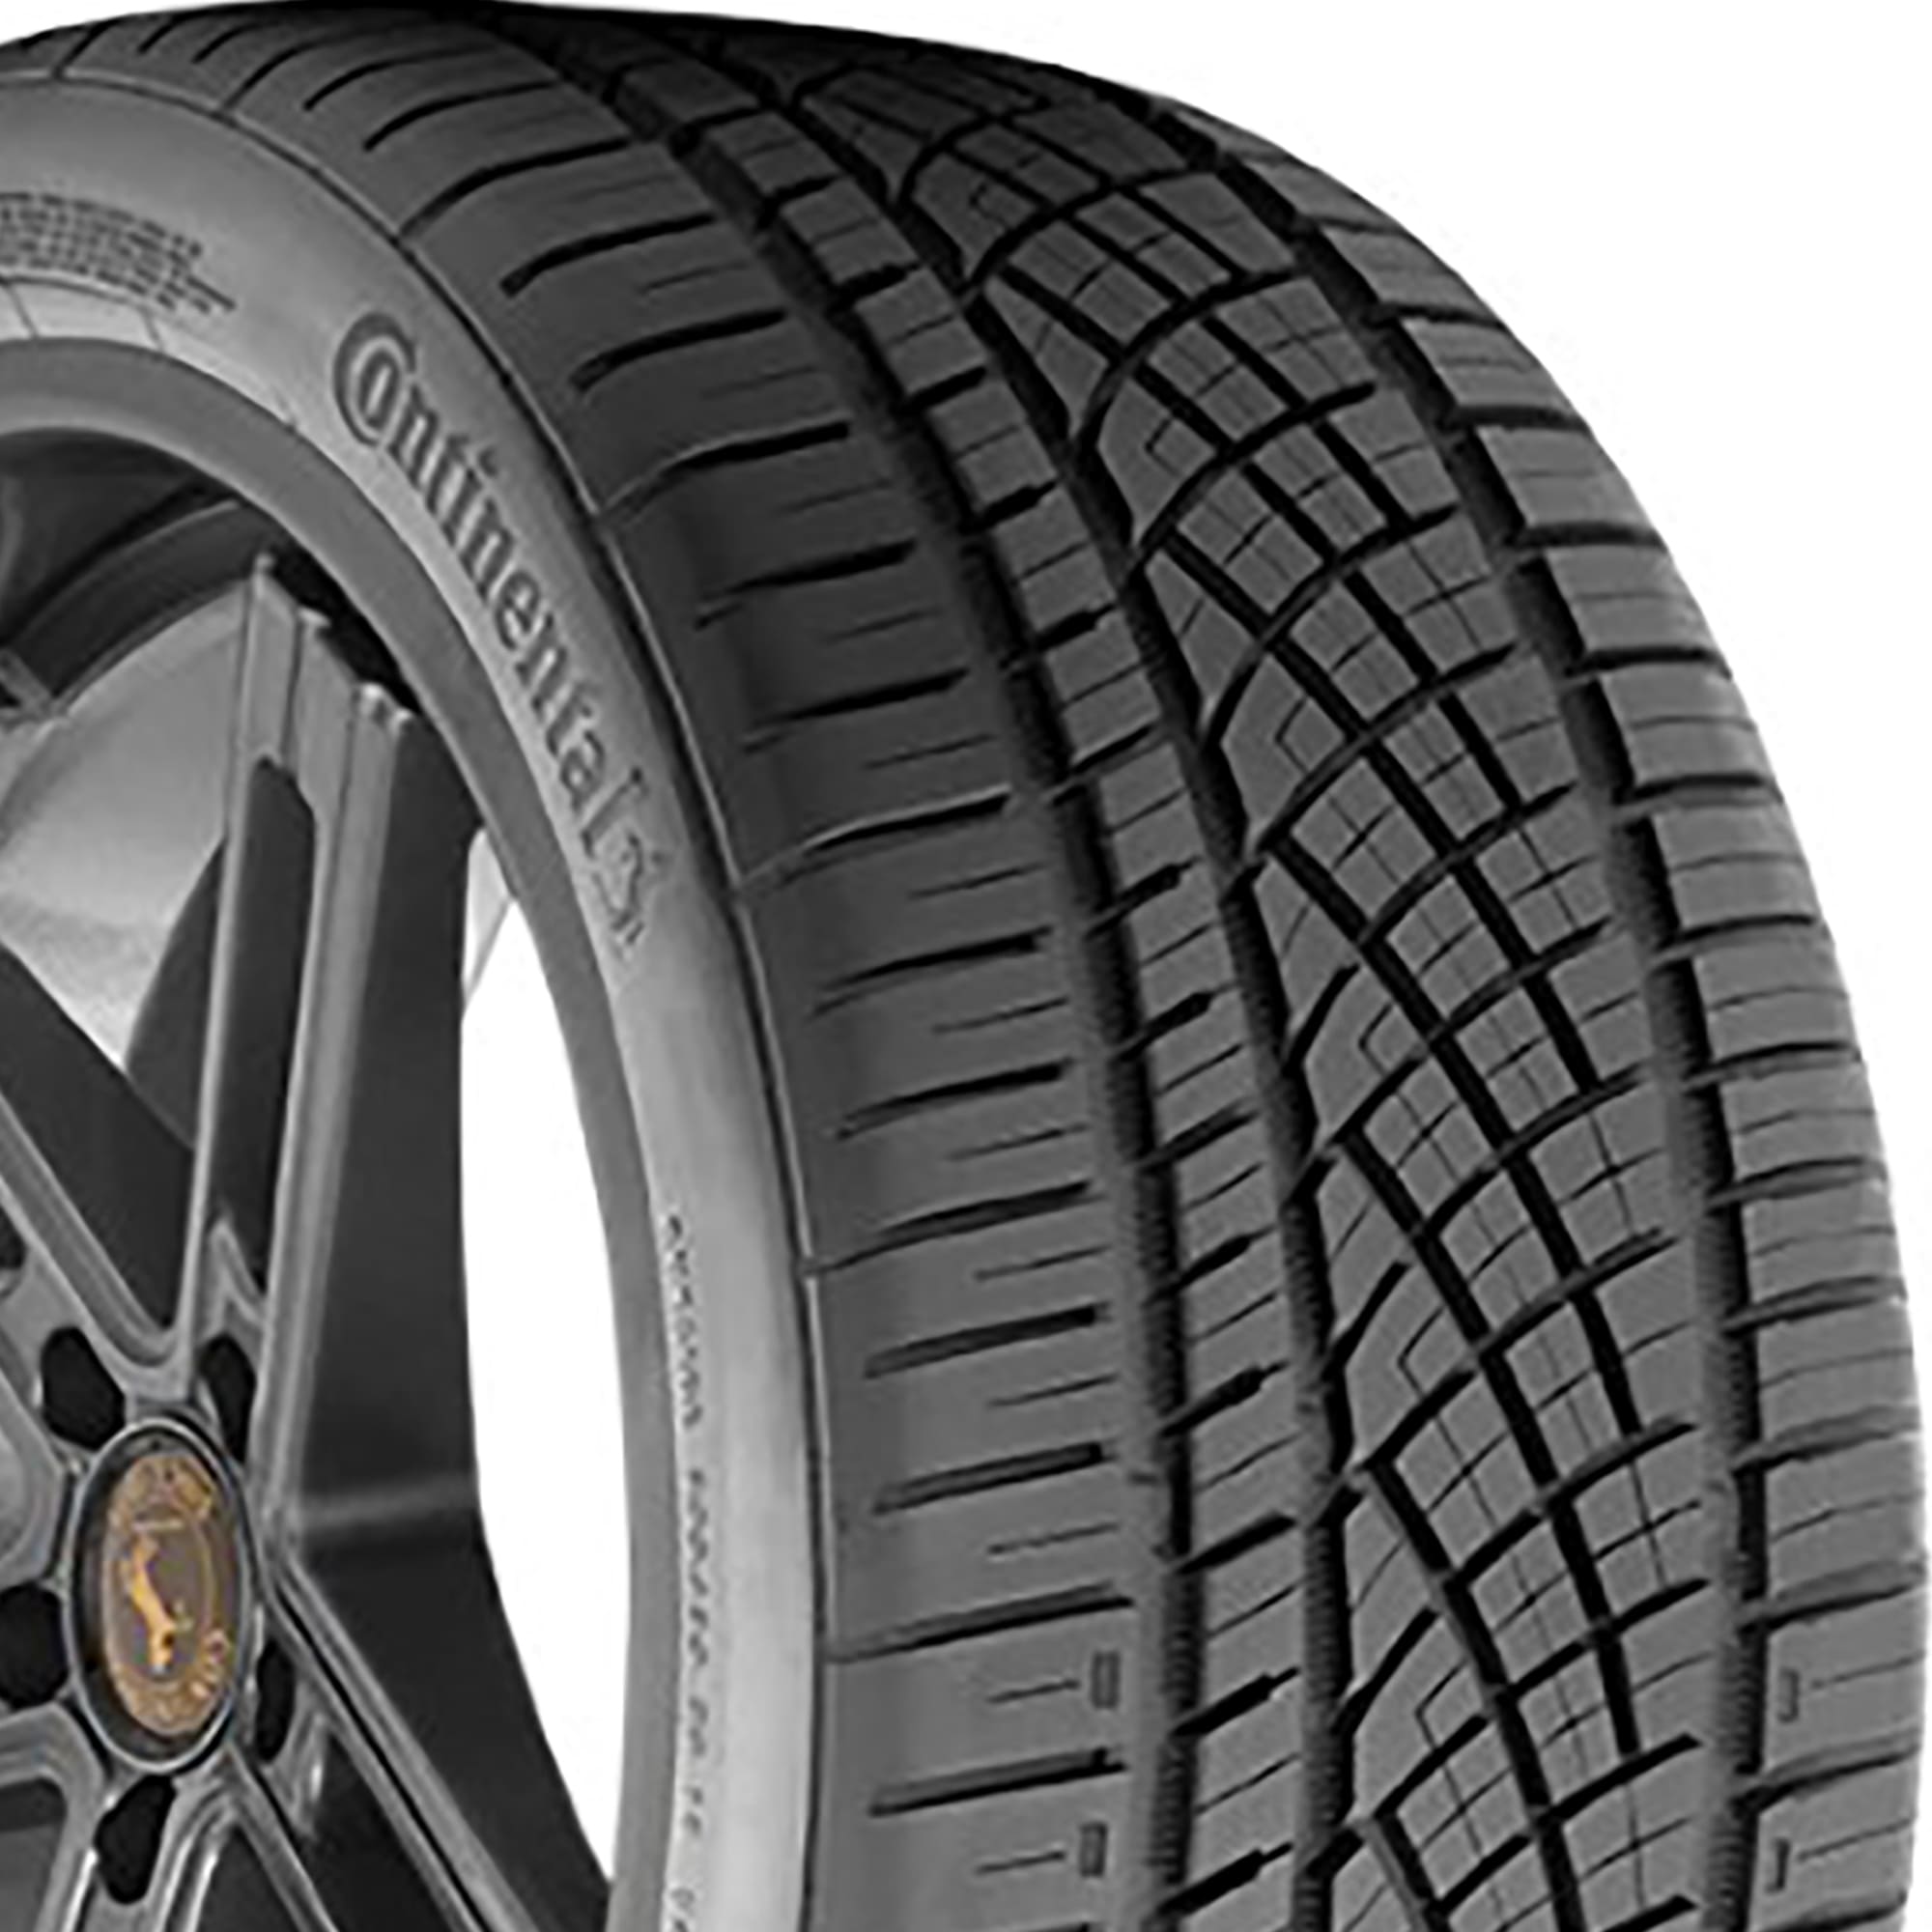 Continental ExtremeContact DWS06 UHP All Season 245/40ZR19 98Y XL Passenger  Tire